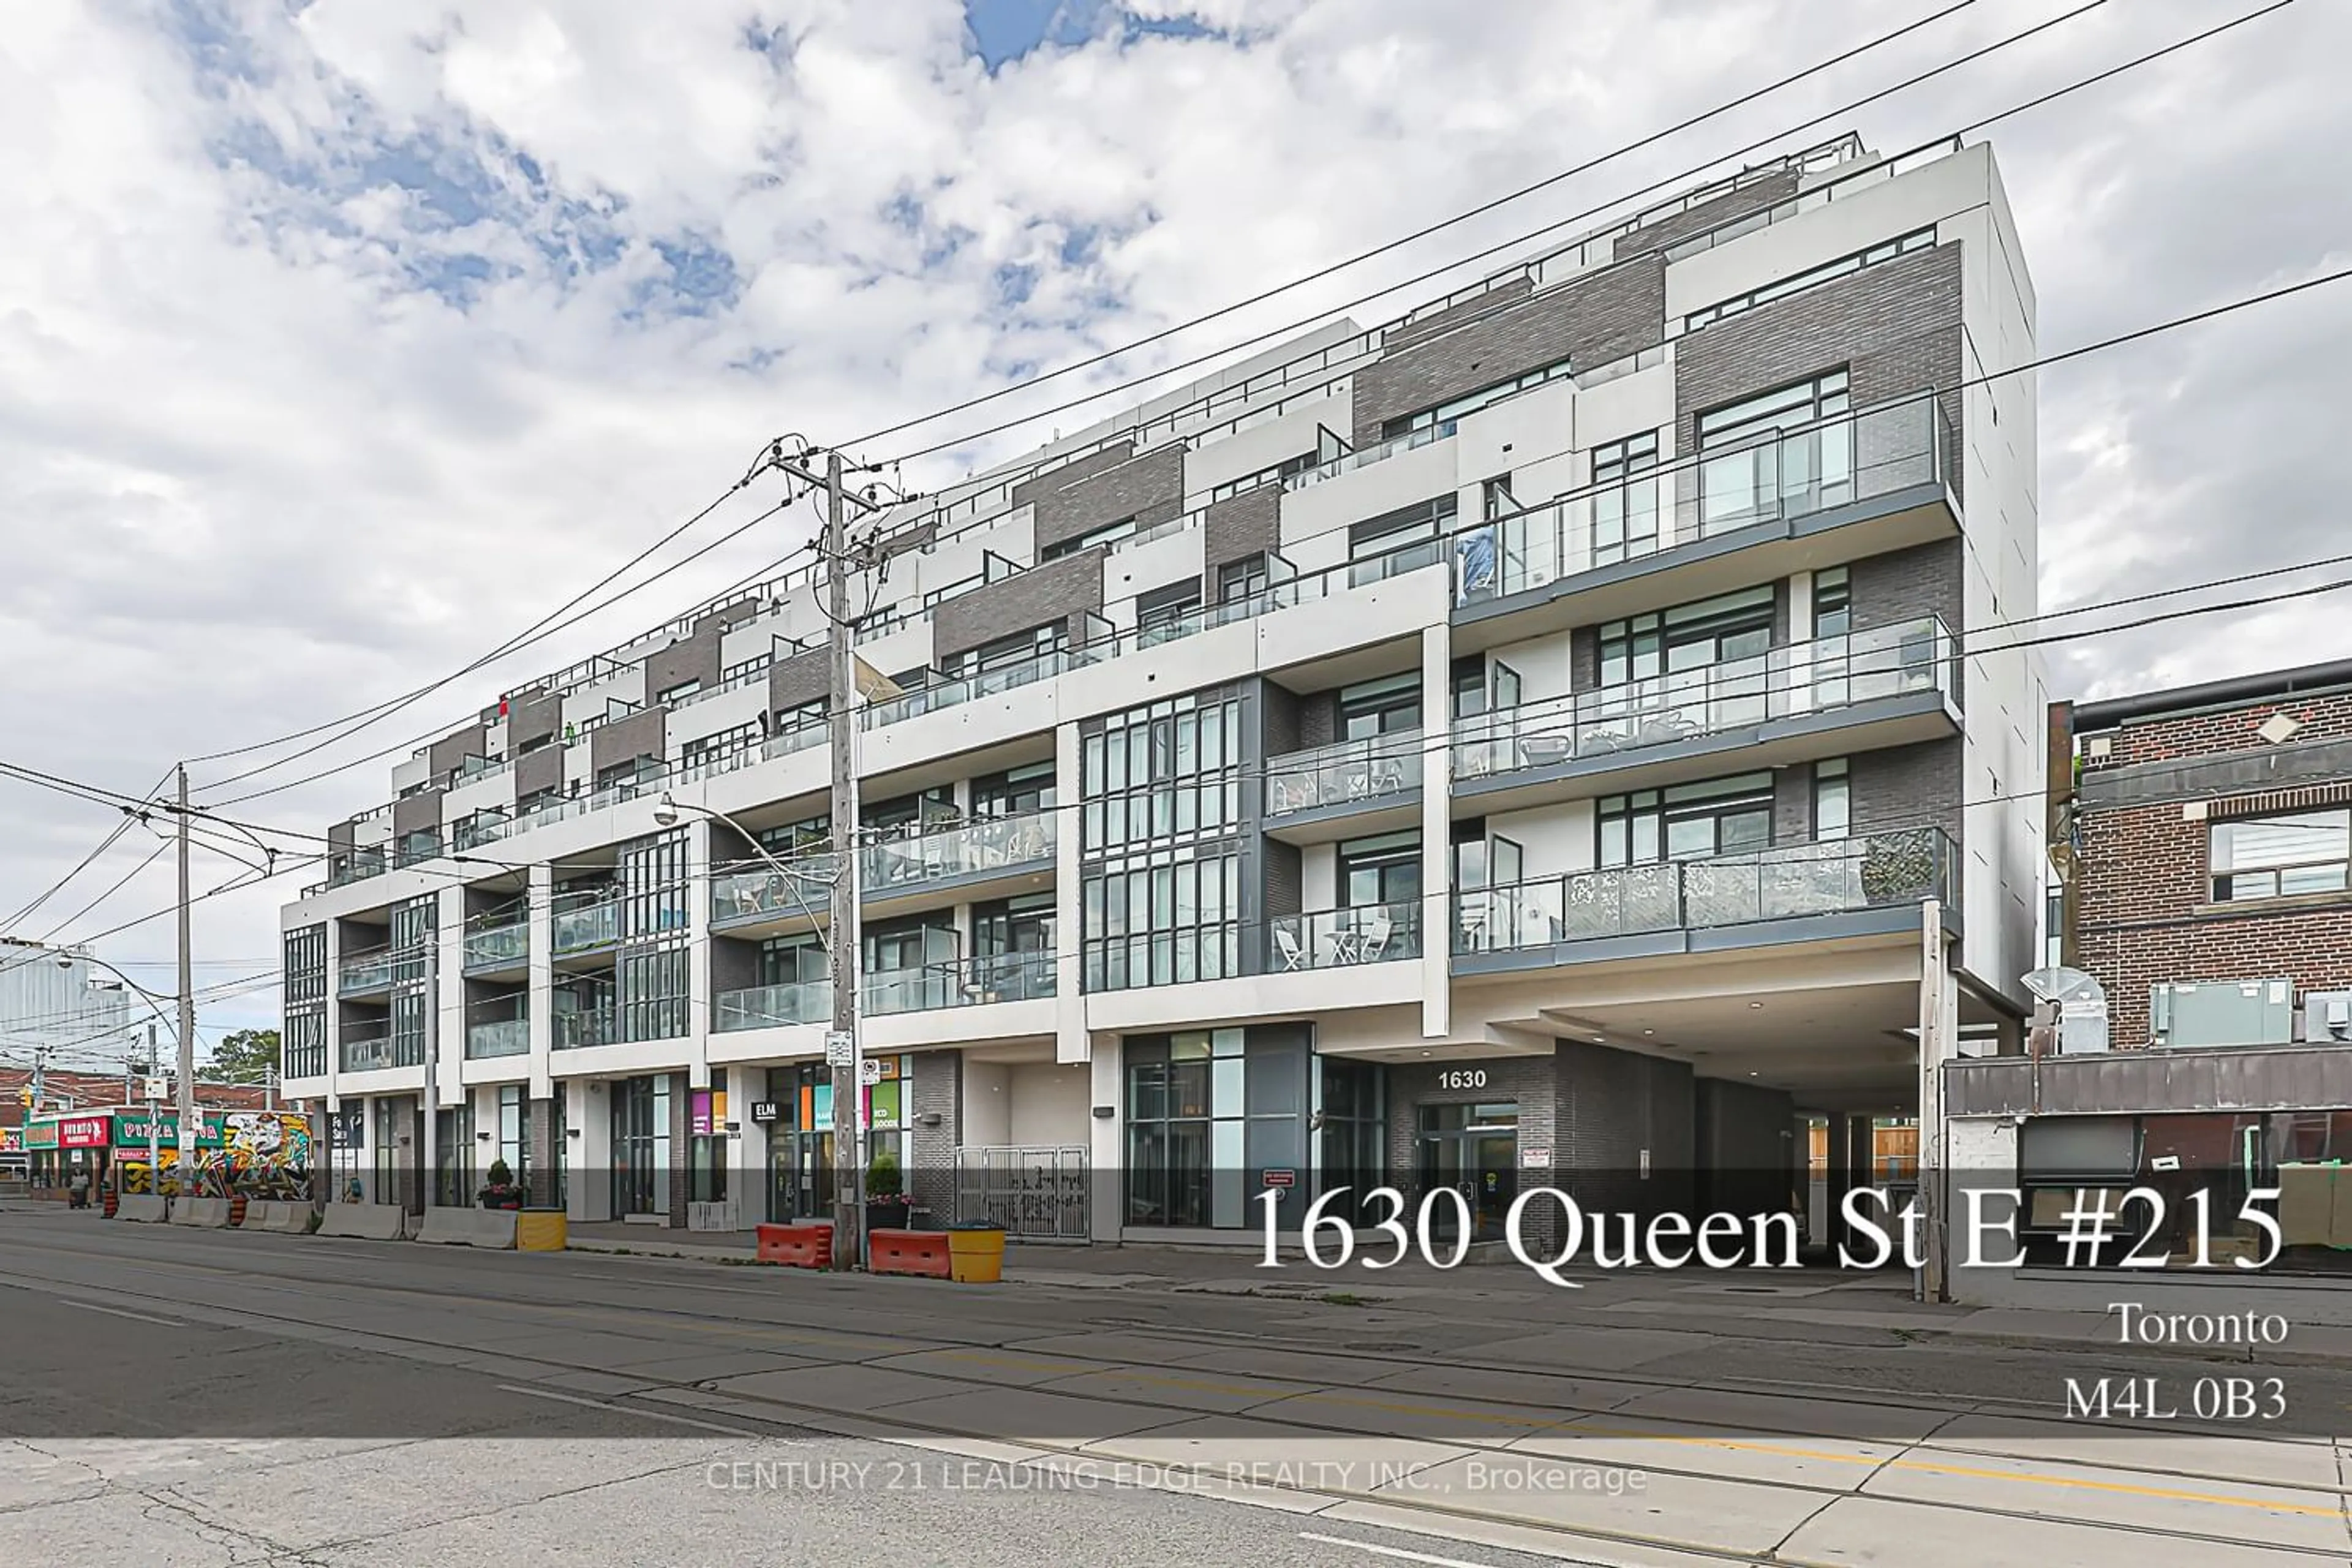 A pic from exterior of the house or condo for 1630 Queen St #215, Toronto Ontario M4L 1G3